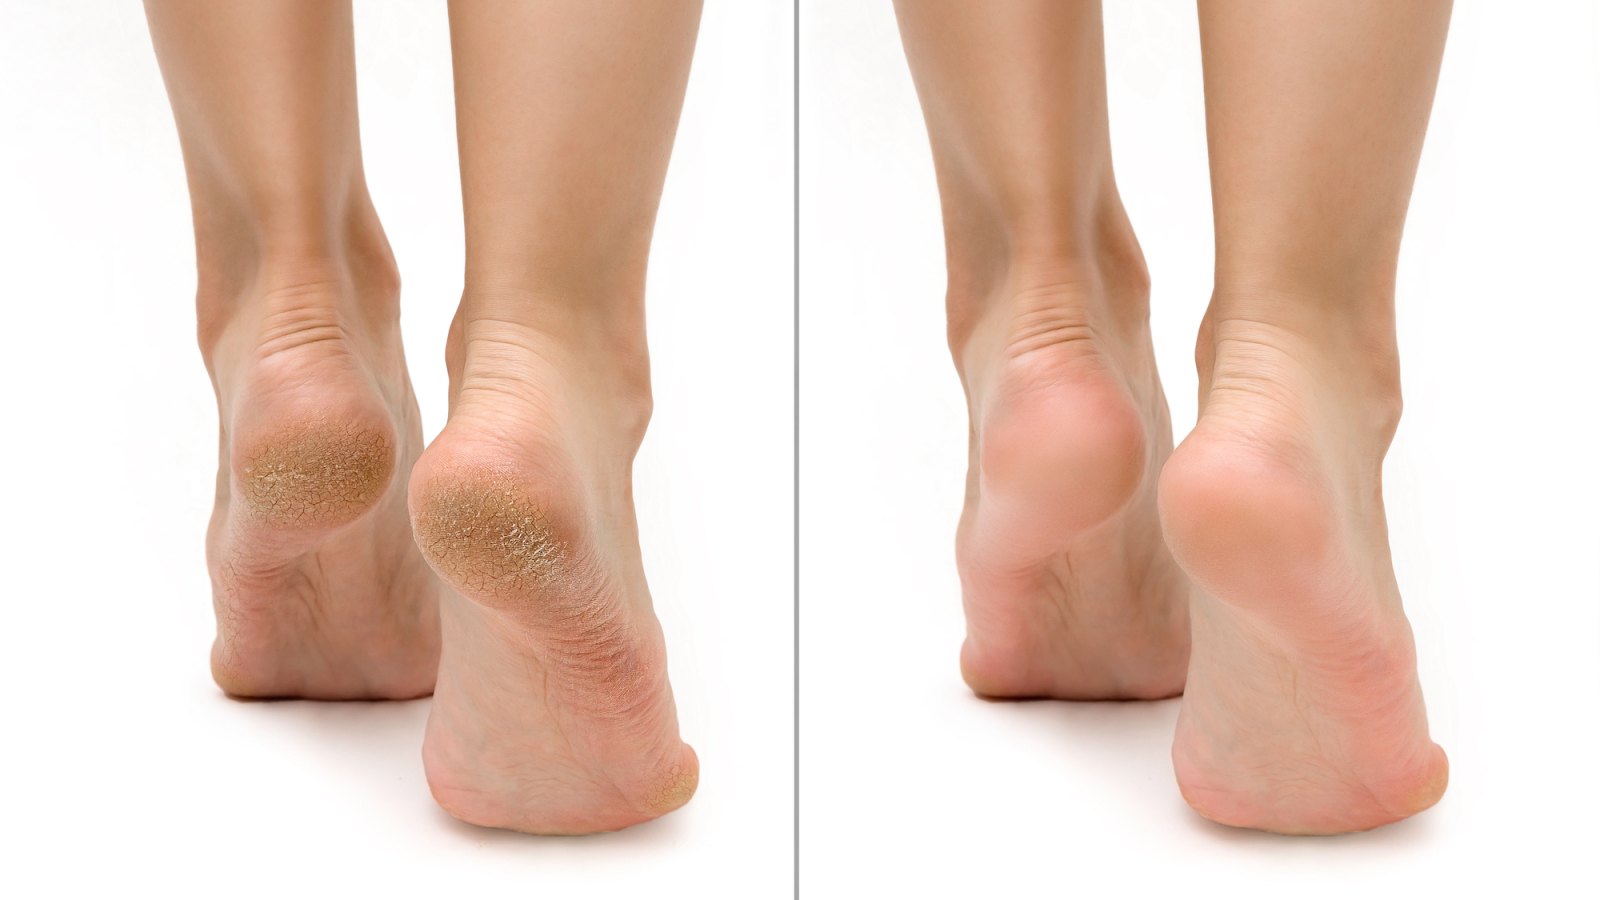 https://www.usmagazine.com/wp-content/uploads/2023/04/Before-After-Pedicure-Foot-Stock-Photo.jpg?w=1600&h=900&crop=1&quality=86&strip=all